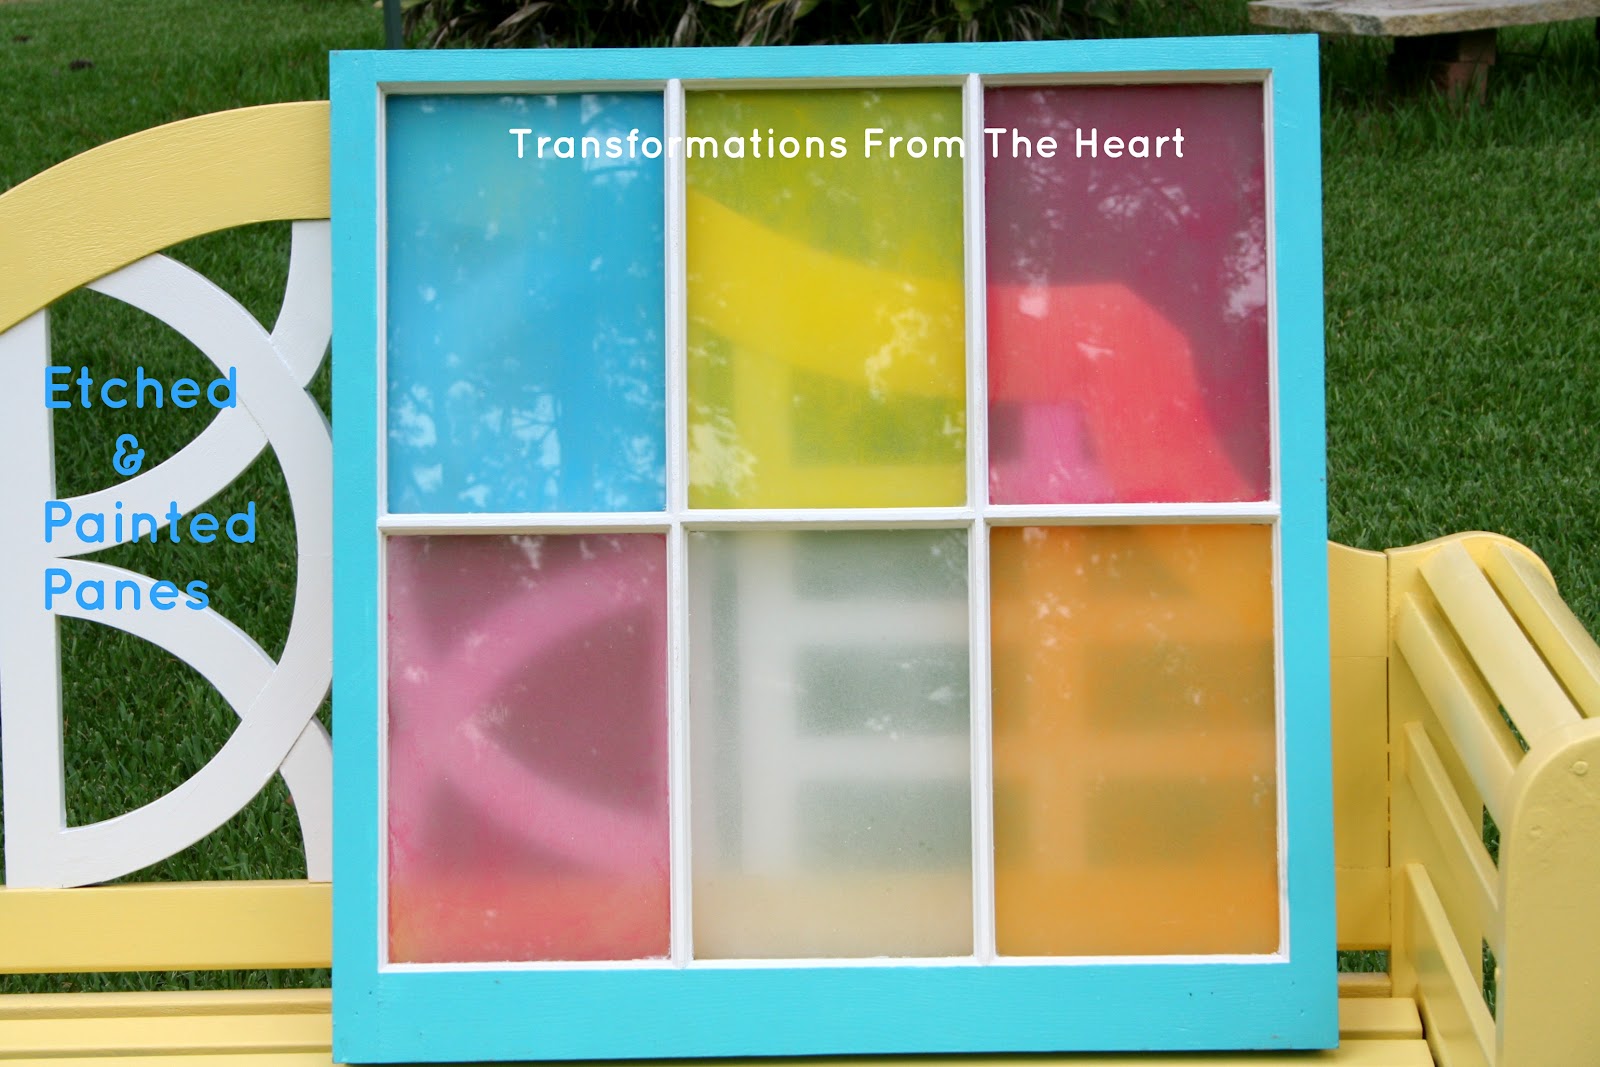 addition painting panes from new Frame~Colorful Old the Transformations Window Heart: glass